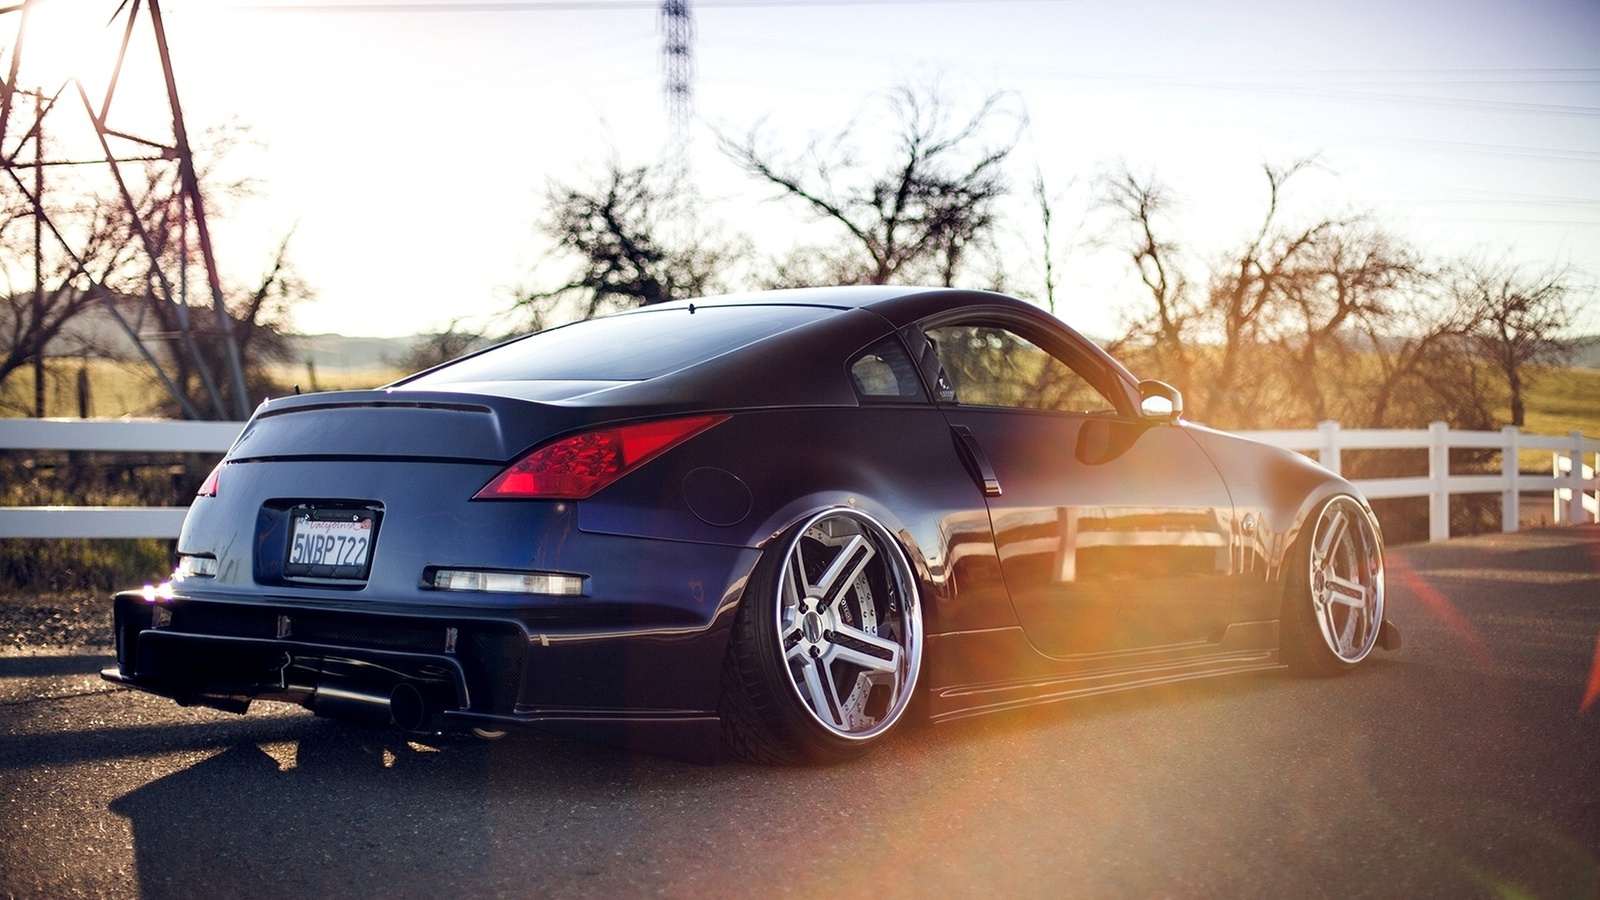 stance, Car, 350, , nissan, twin turbo, , 350z, tuning